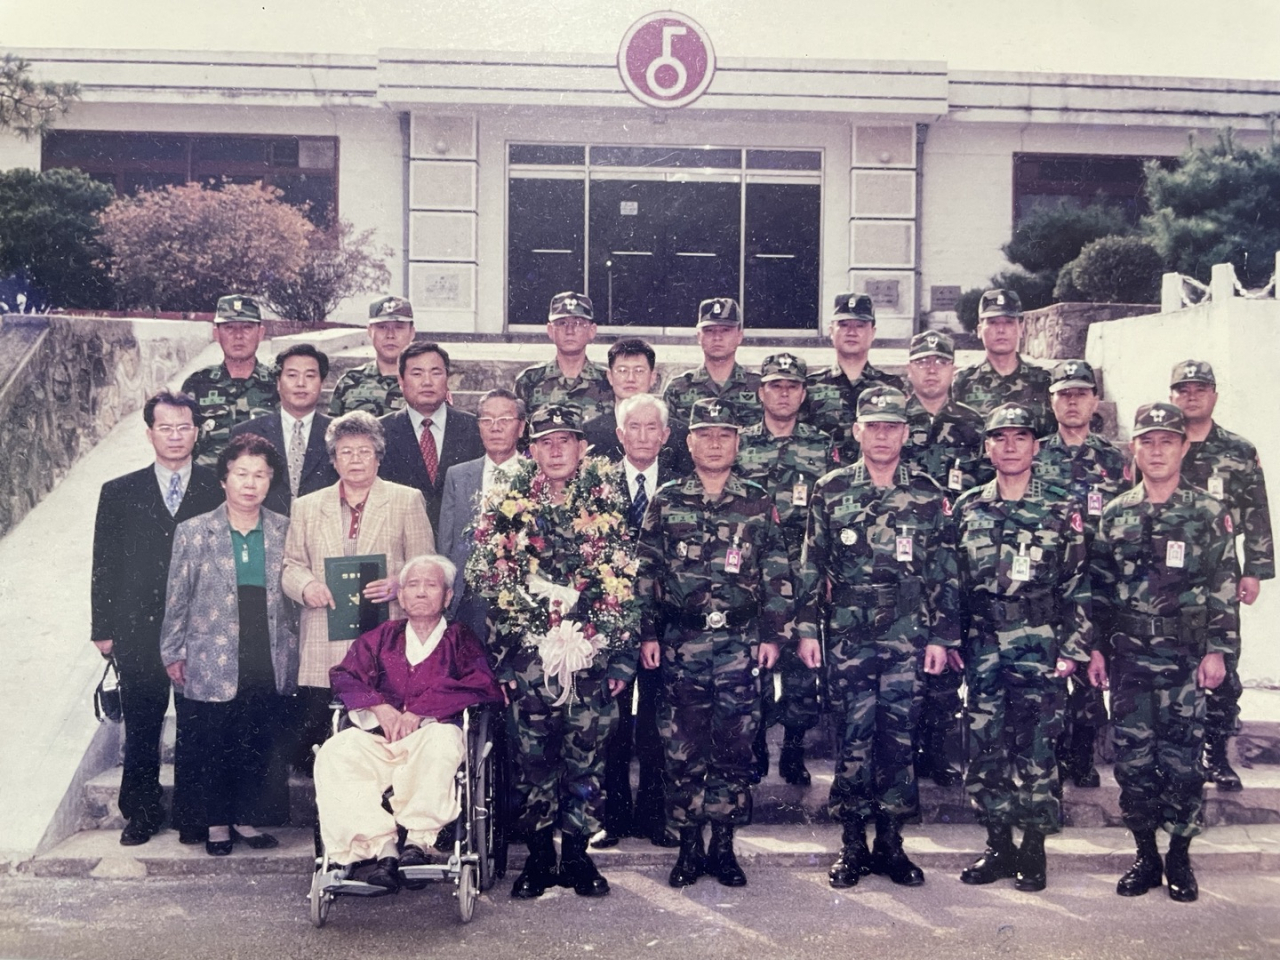 Yoo Young-bok held a belated retirement ceremony at the 5th Infantry Division headquarters located in Yeoncheon County, Gangwon Province, near the inter-Korean border in October 2000. (Courtesy of Yoo)